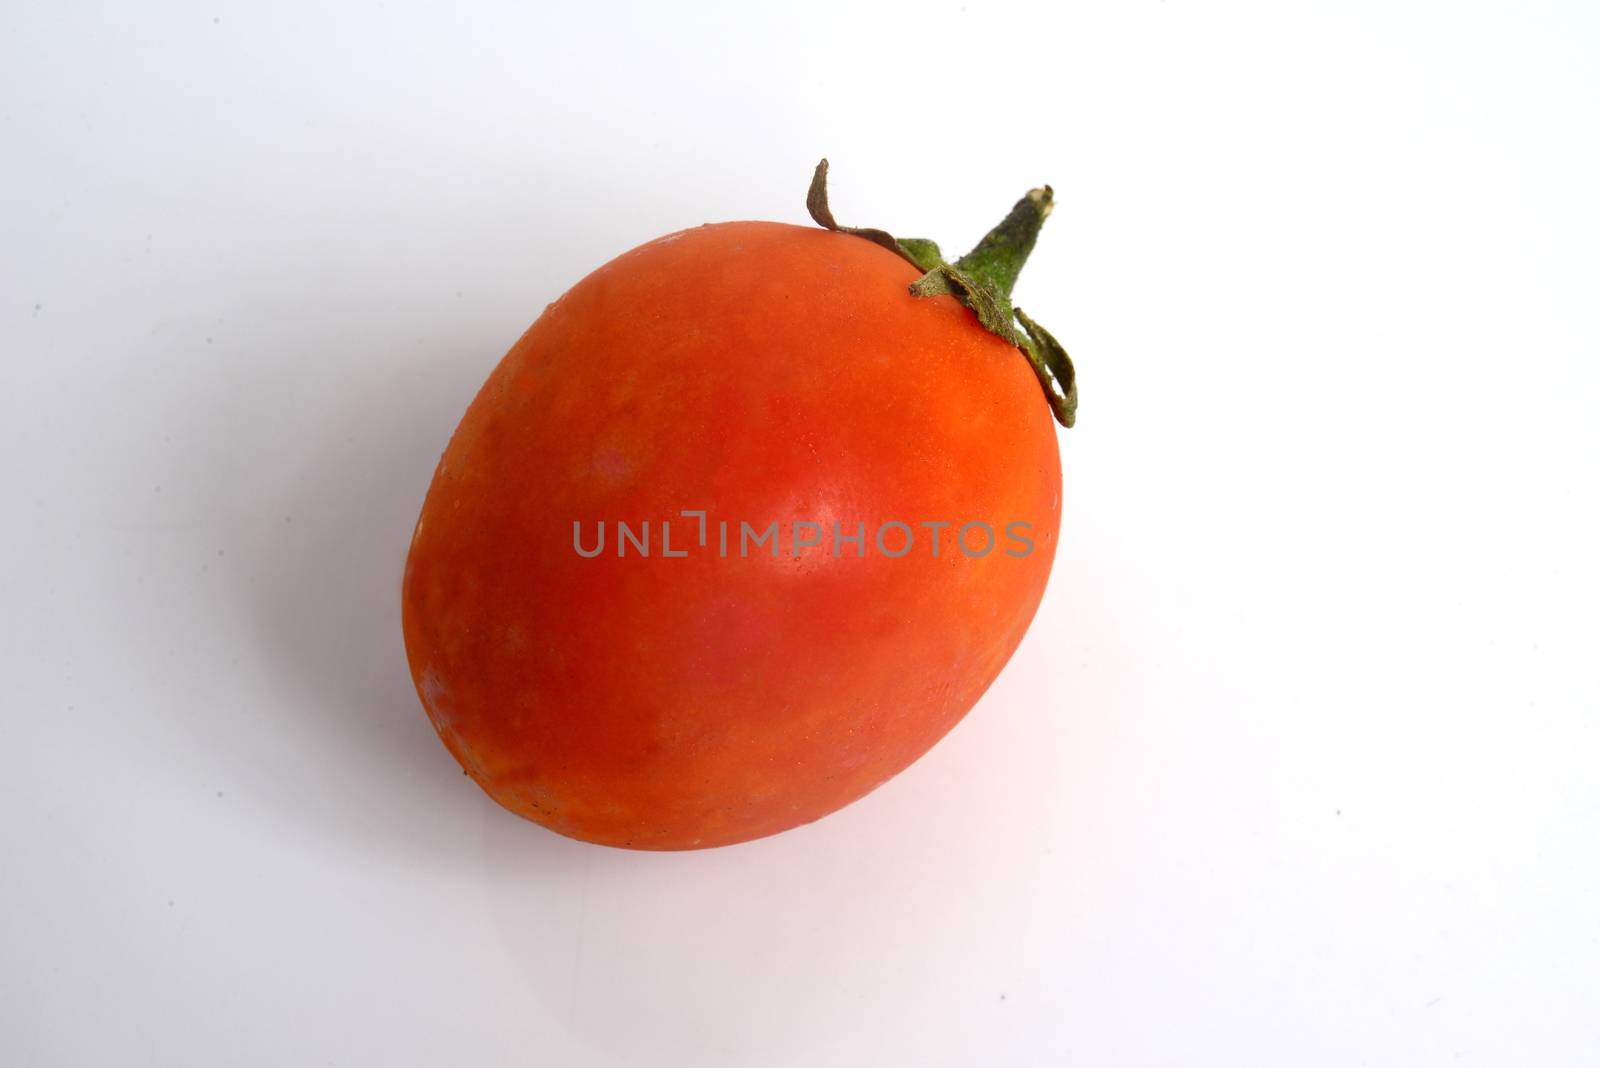 Tomato, (Solanum lycopersicum), flowering plant of the nightshade family (Solanaceae), cultivated extensively for its edible fruits.  by ideation90